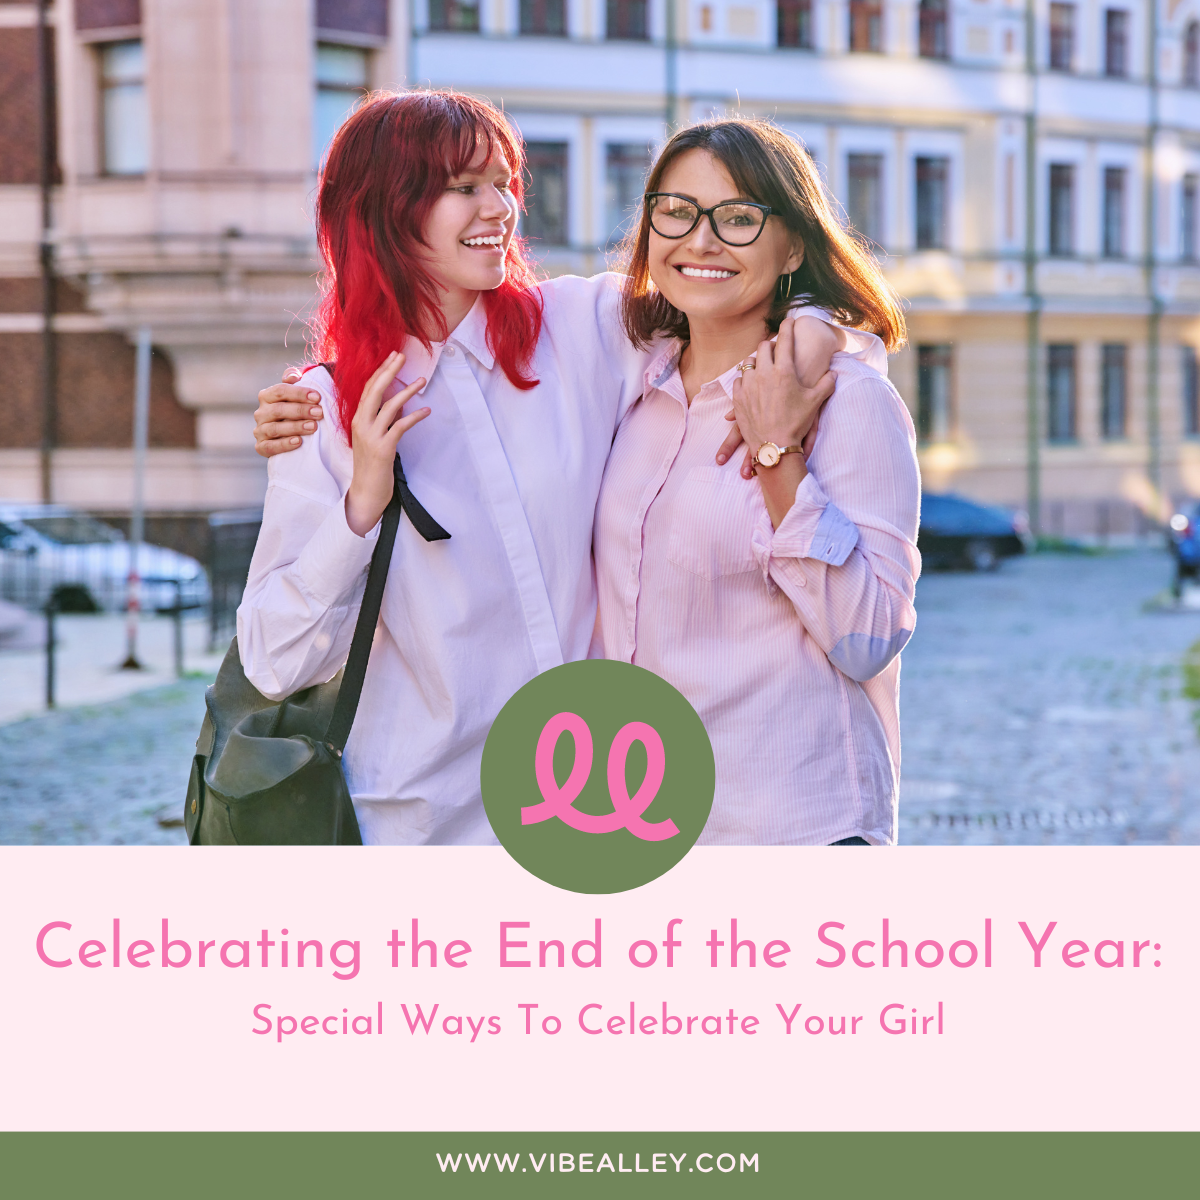 Celebrating the End of the School Year: Special Ways To Celebrate Your Girl